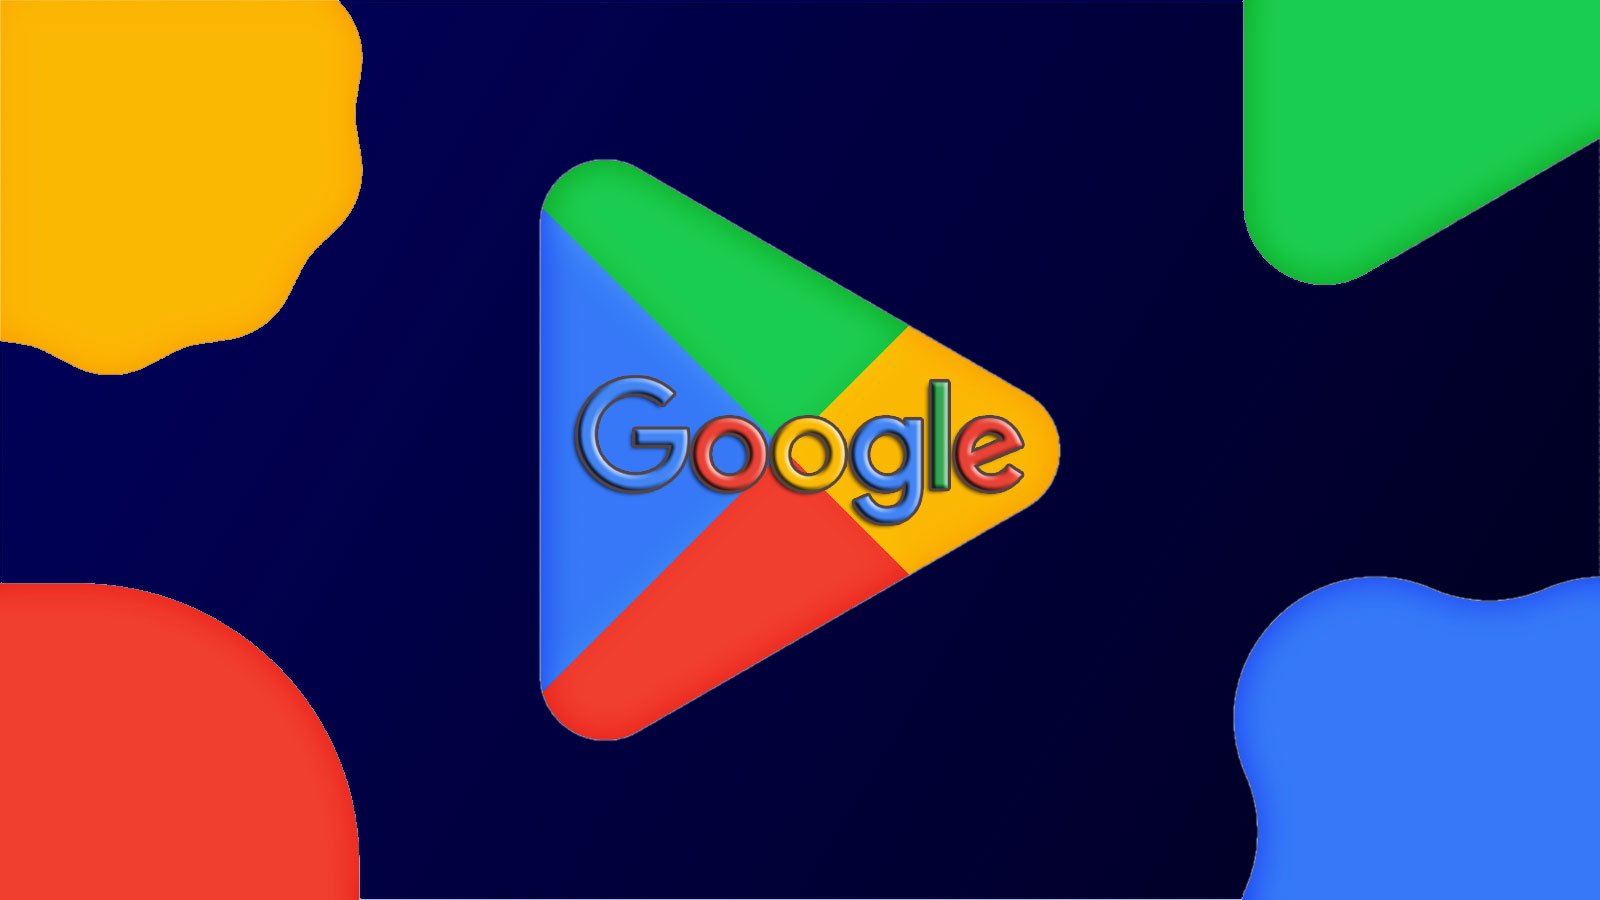  Apps on Google Play